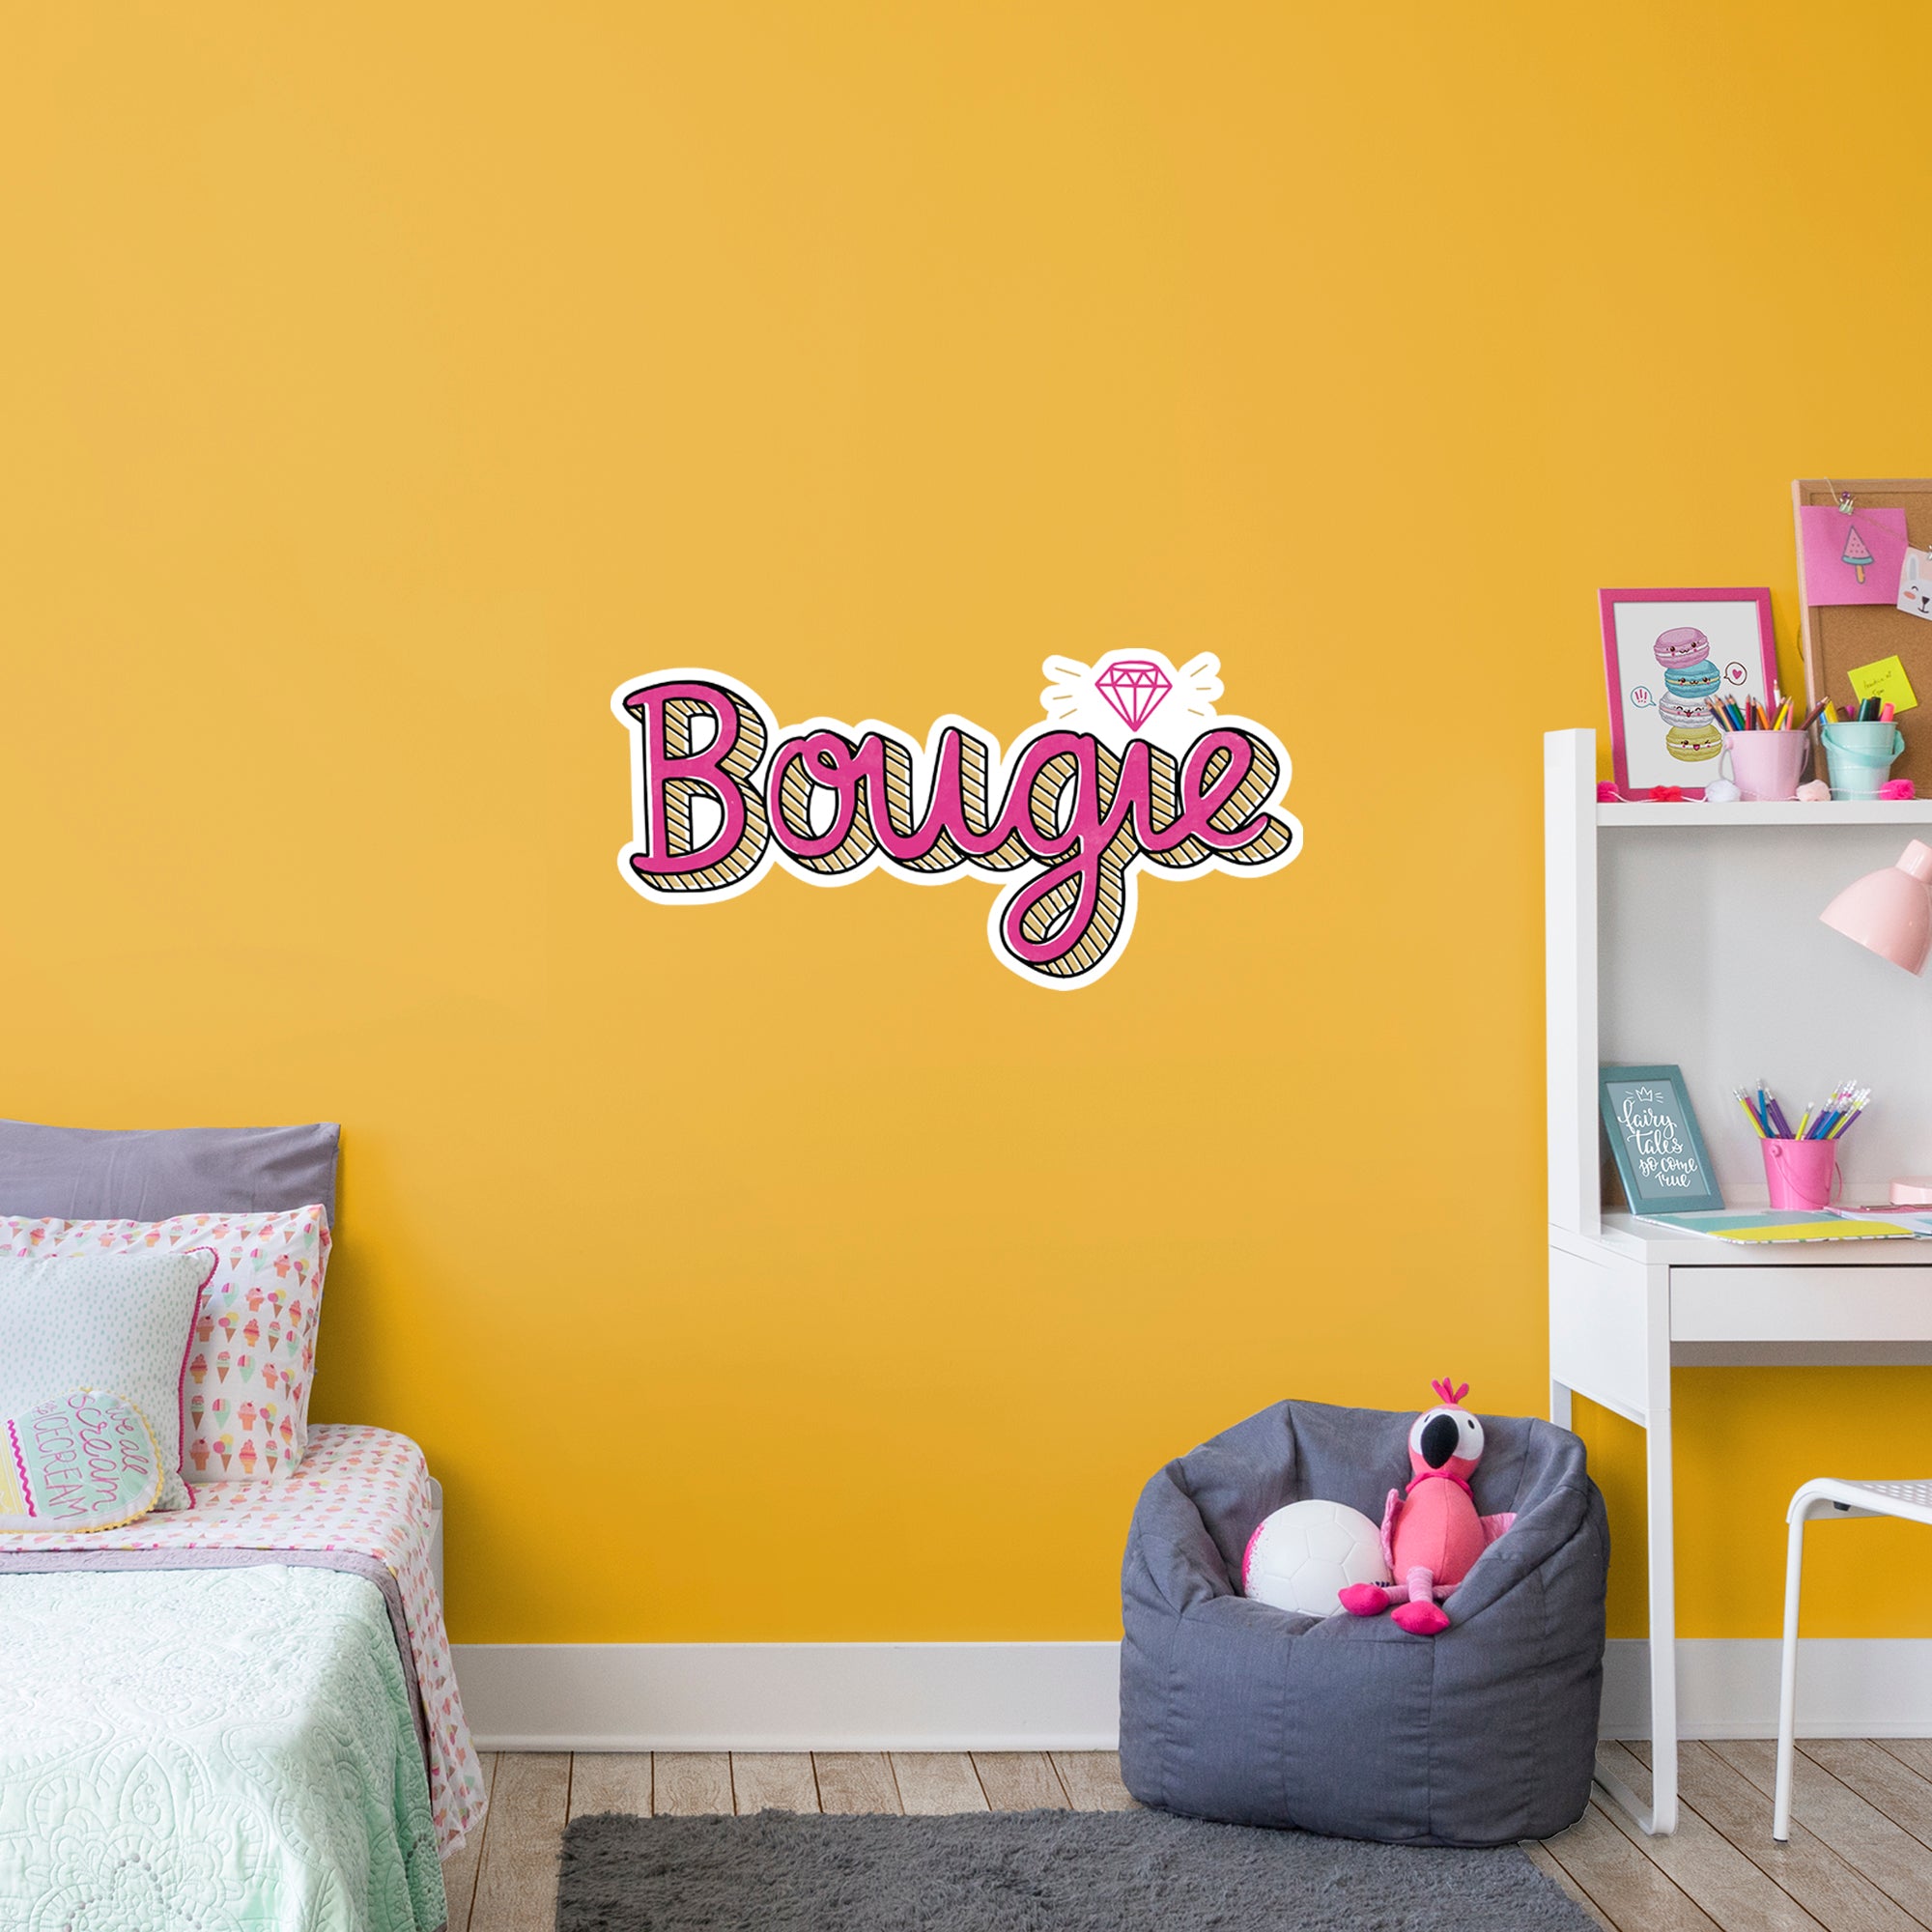 Bougie - Officially Licensed Big Moods Removable Wall Decal XL by Fathead | Vinyl